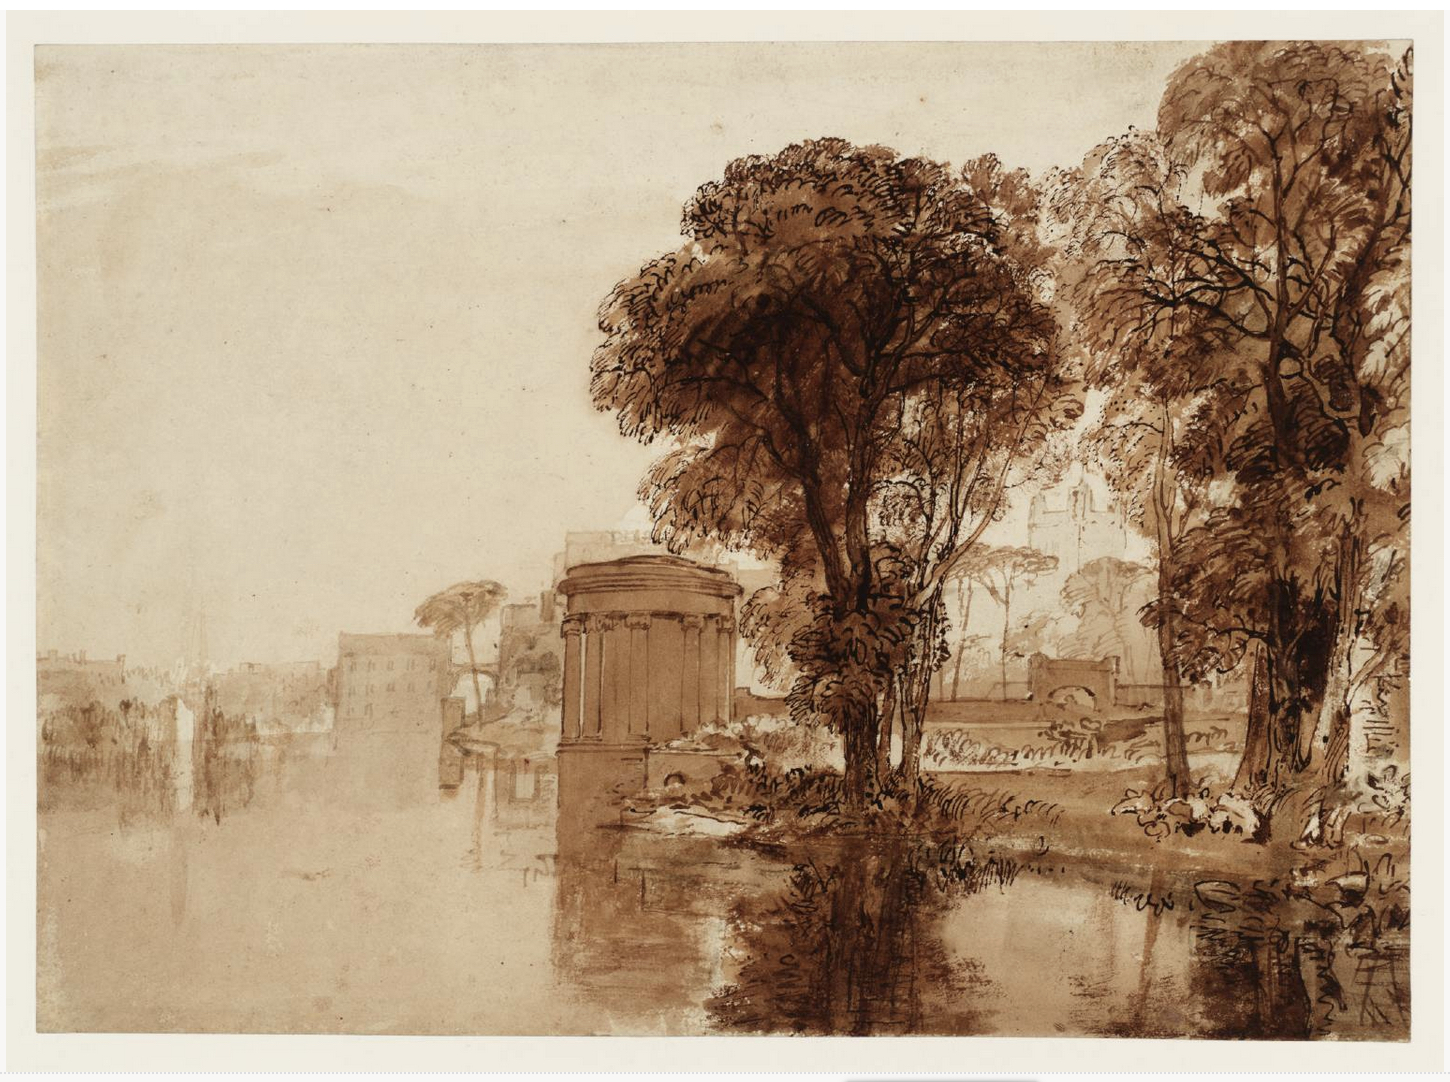 Sepia-toned inkwash drawng of a small body of water with deciduous trees on the right, a classical building with columns in the center, and some vernacular buildings in the distance to the left.